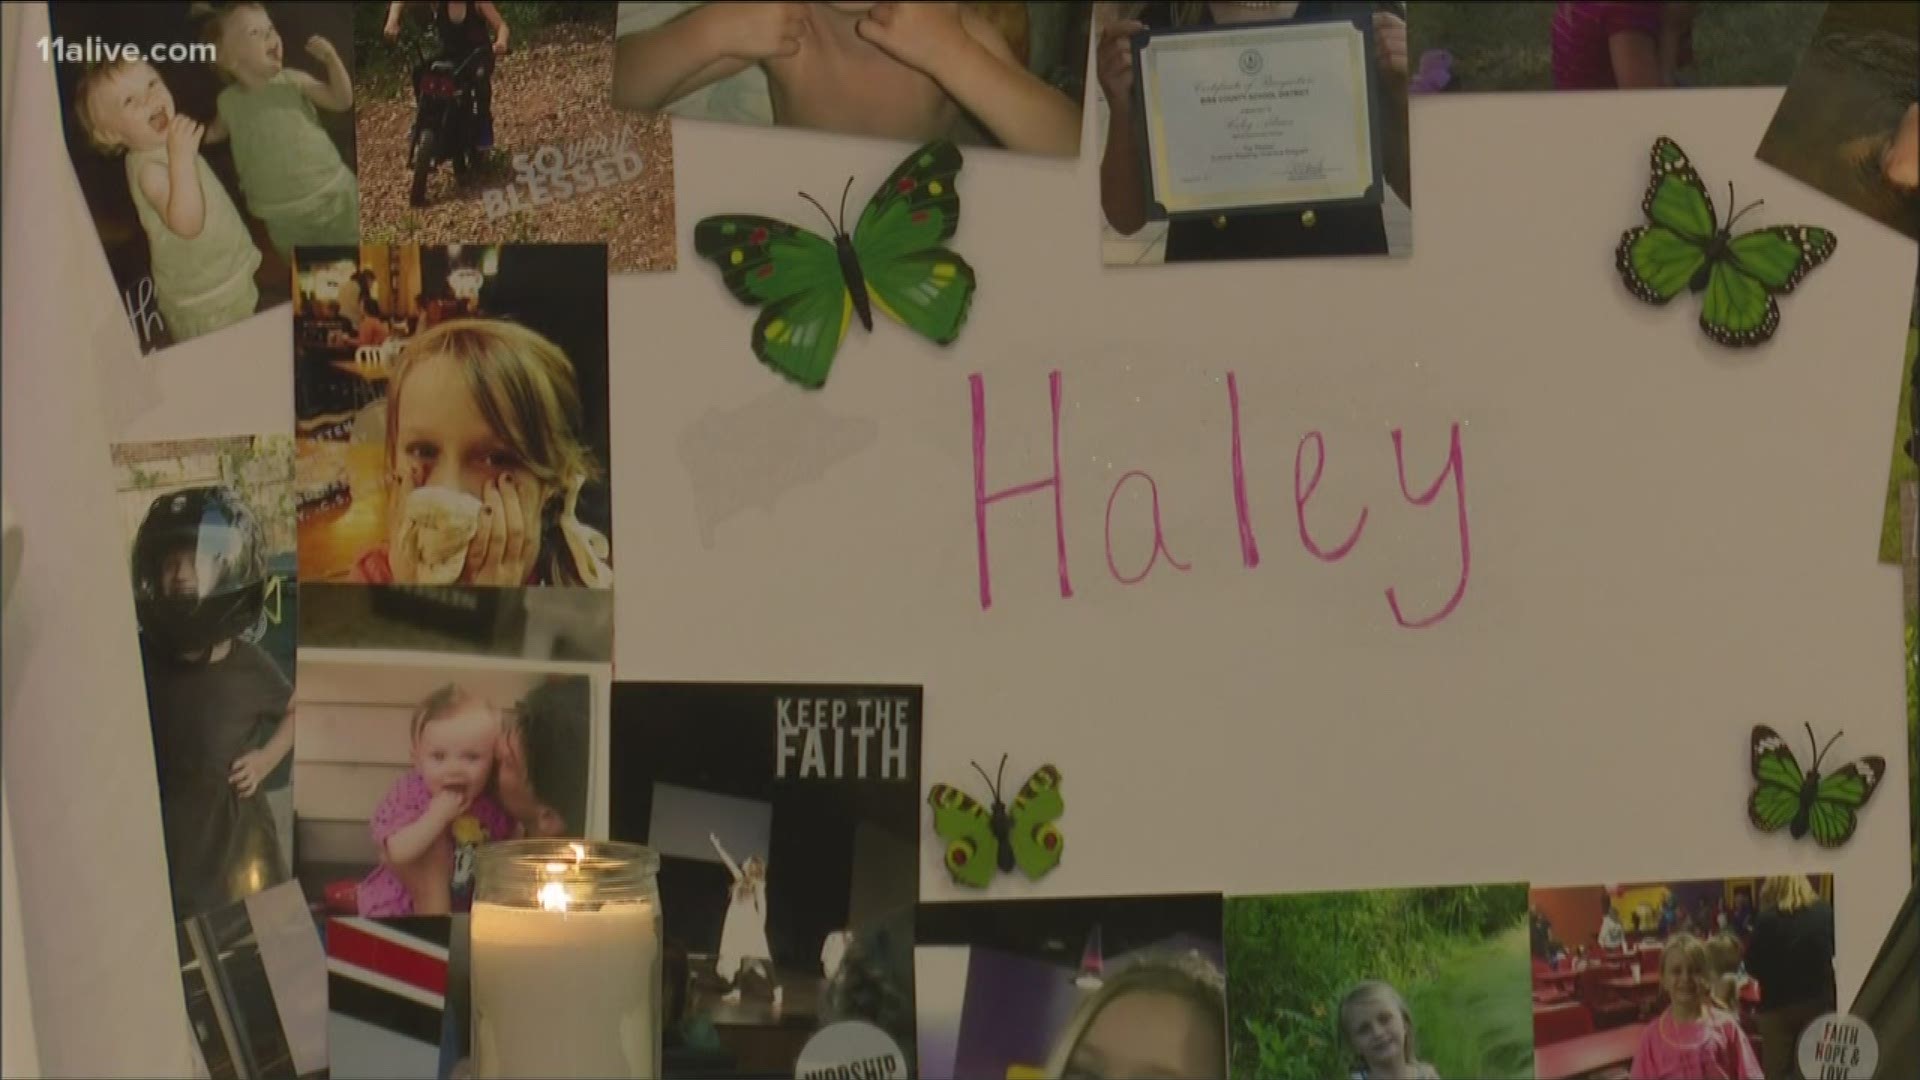 Fourteen-year-old Haley Adams was shot in the back during a home invasion in Coweta County. She had just moved from the Macon area.